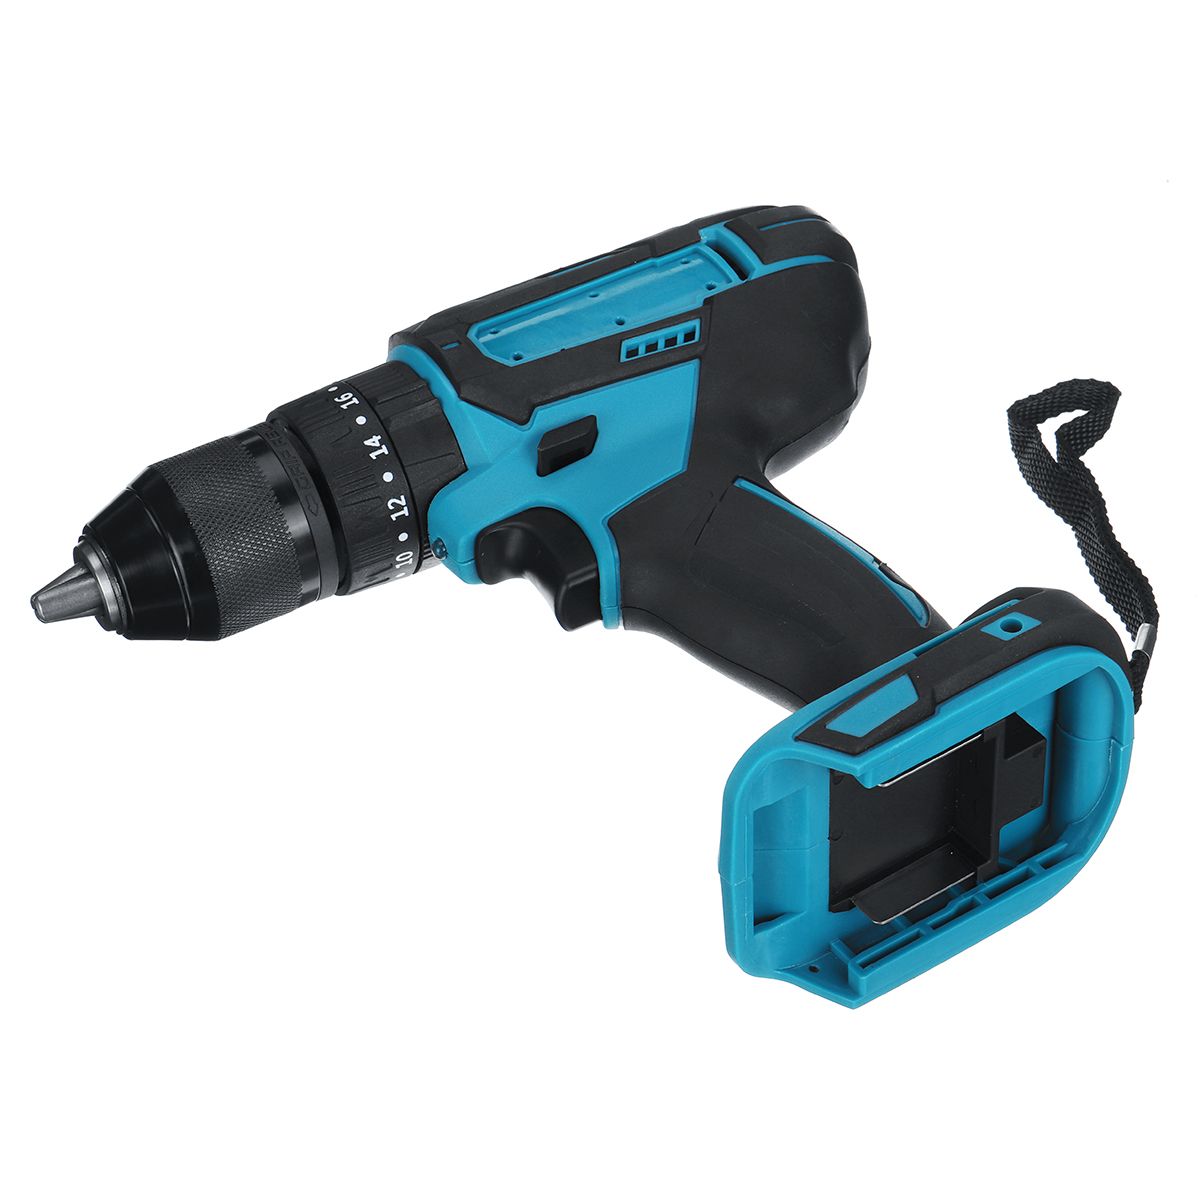 18V-Cordless-Electric-Impact-Drill-2-Speed-Power-Screwdriver-Adapted-To-18V-Makita-battery-1627343